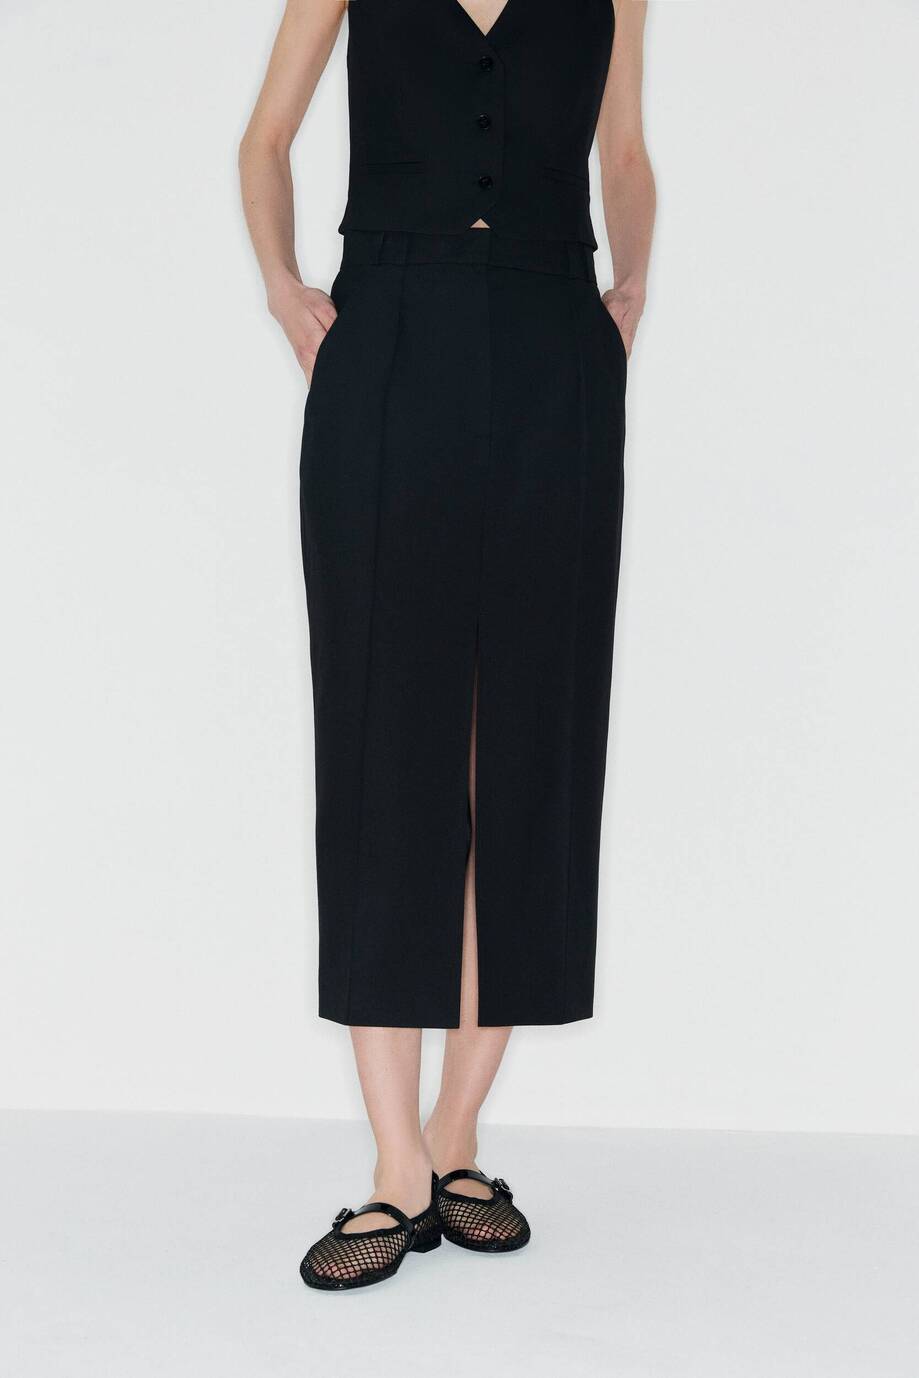 Skirt with a front slit